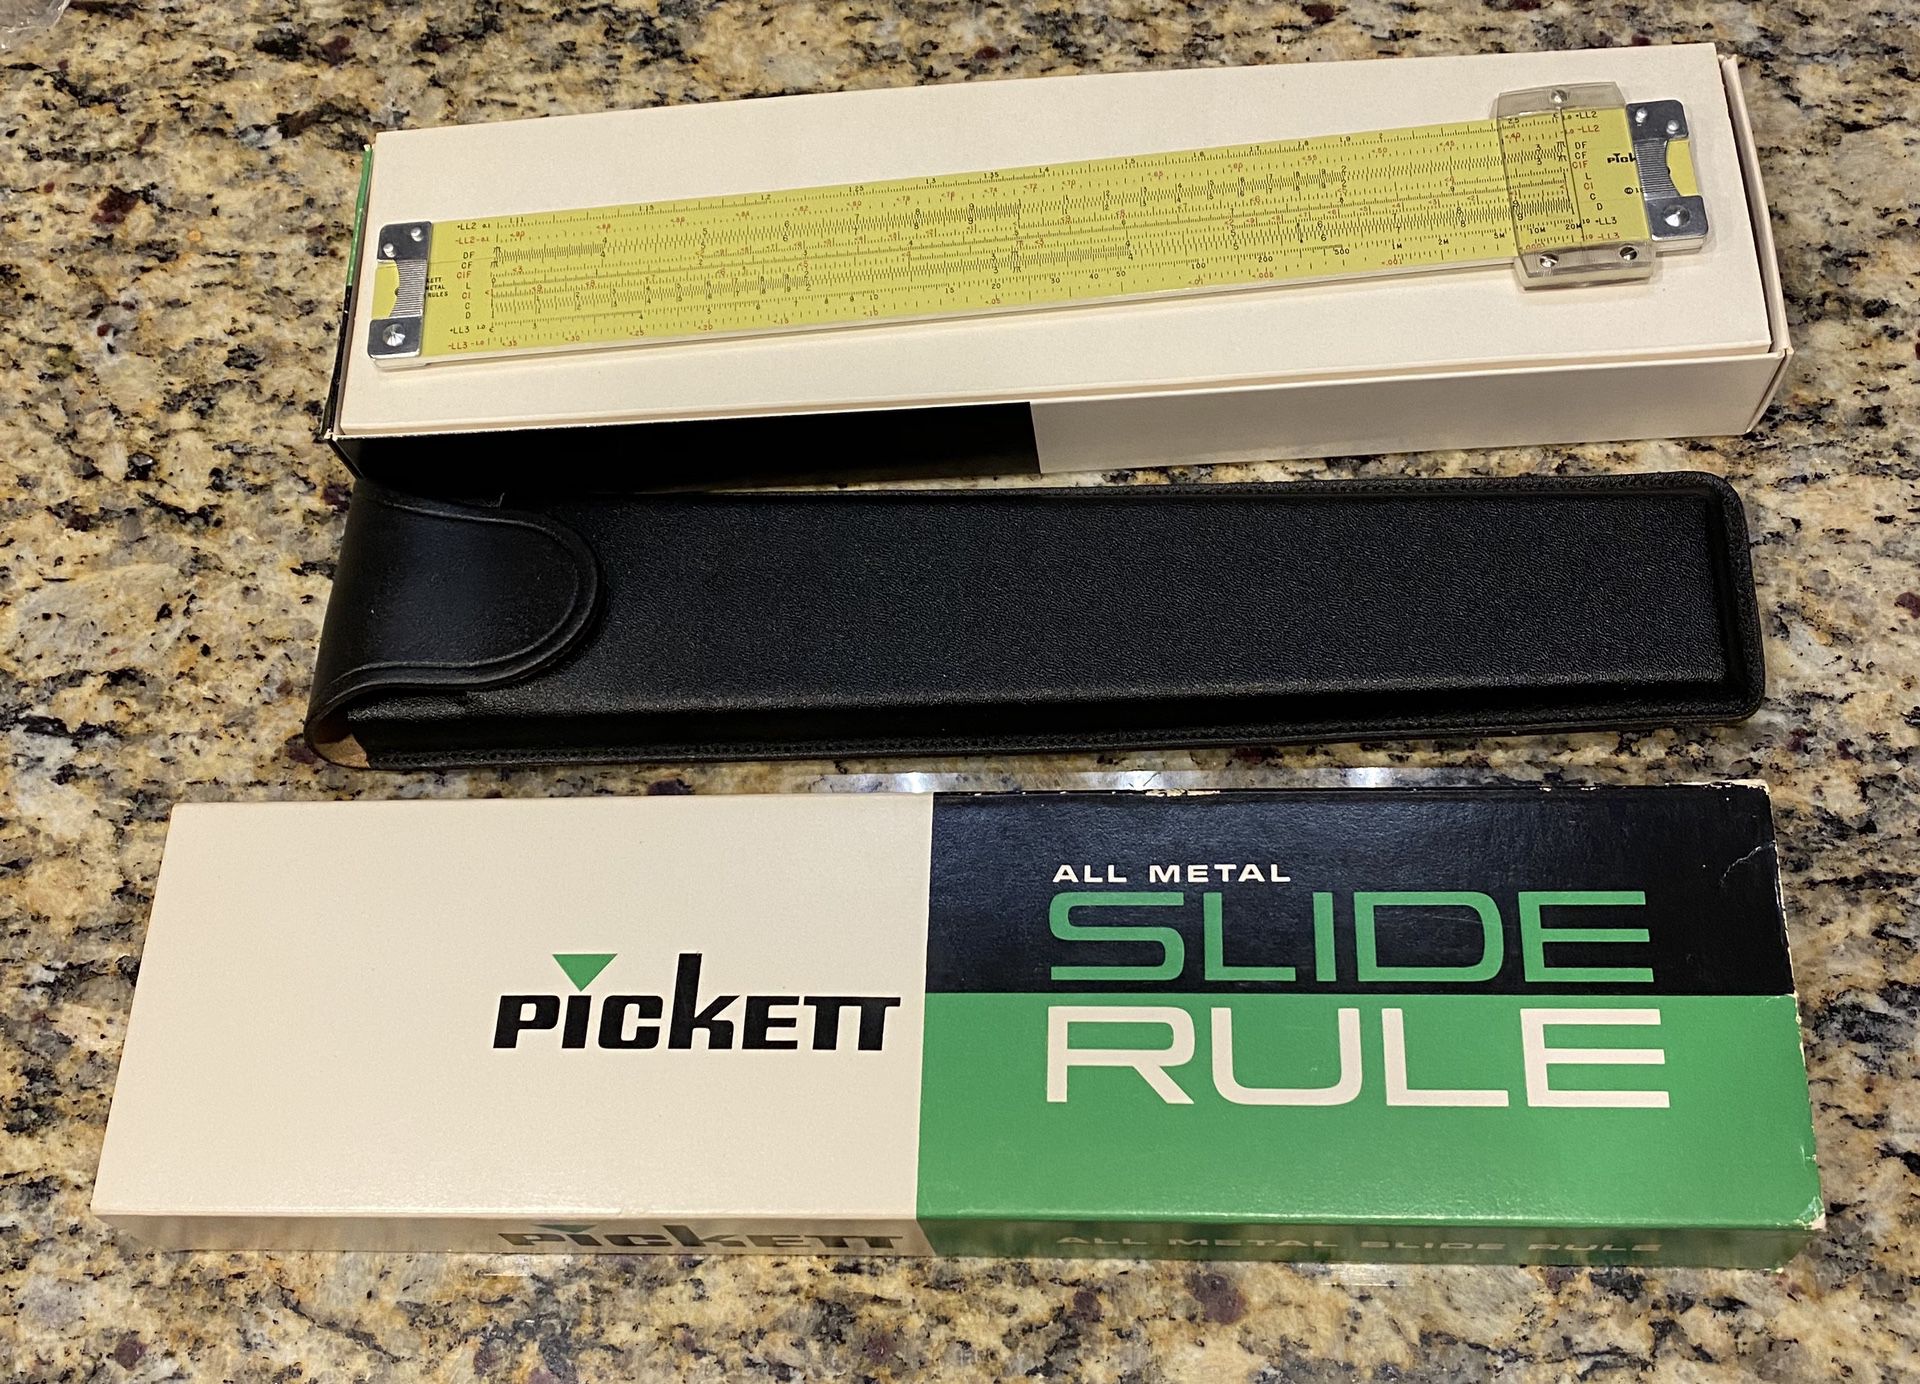 (2) Pickett All Metal Slide Rules made in 1953